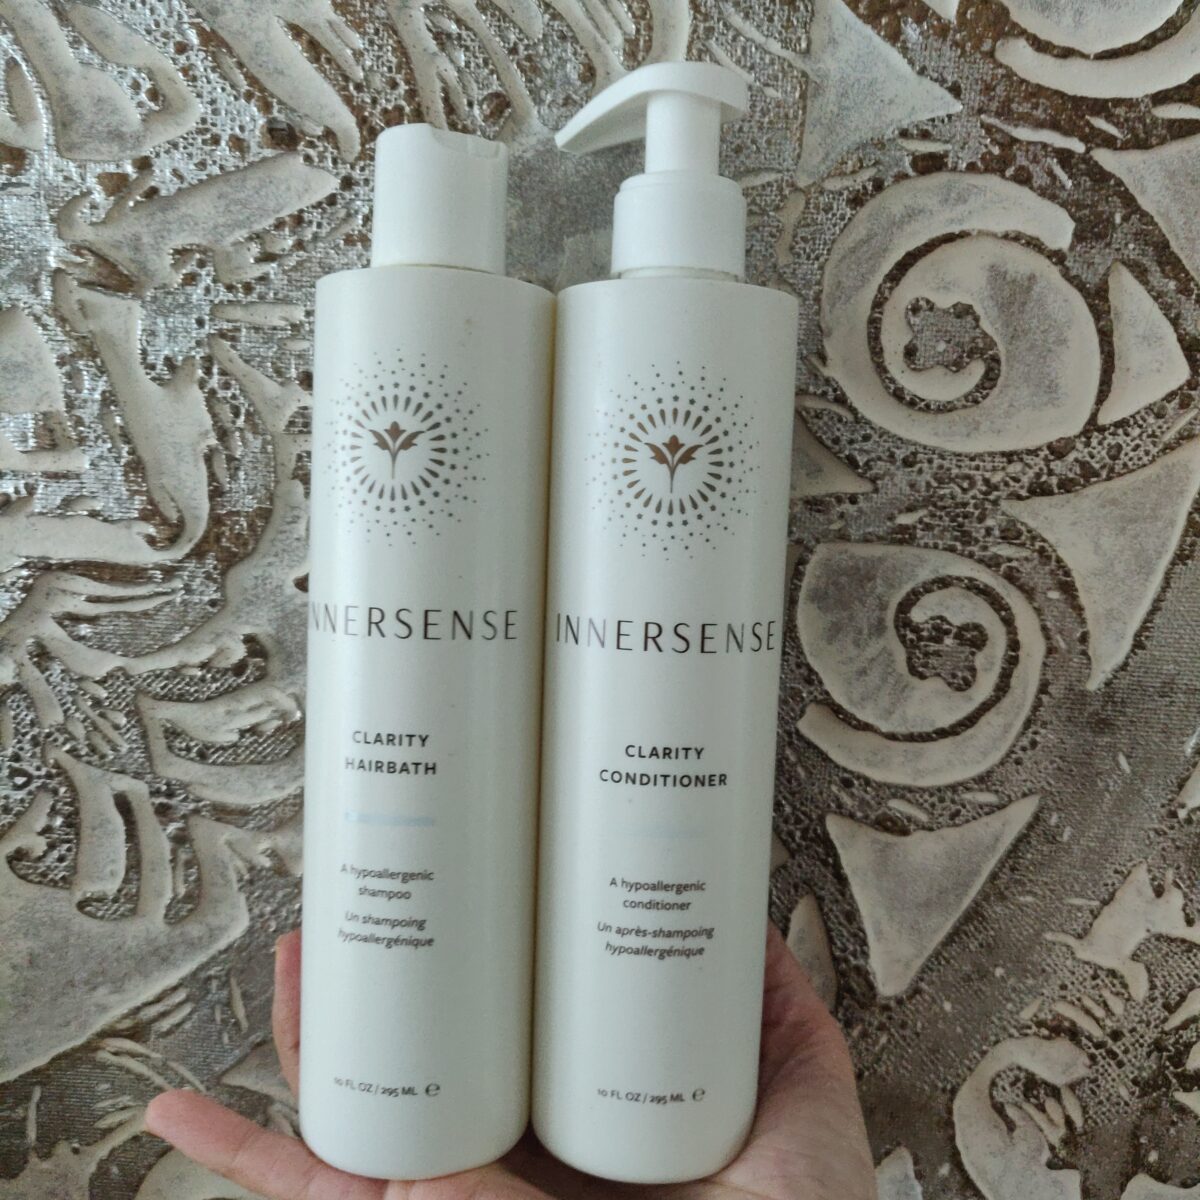 Everything you need to know about Innersense Beauty